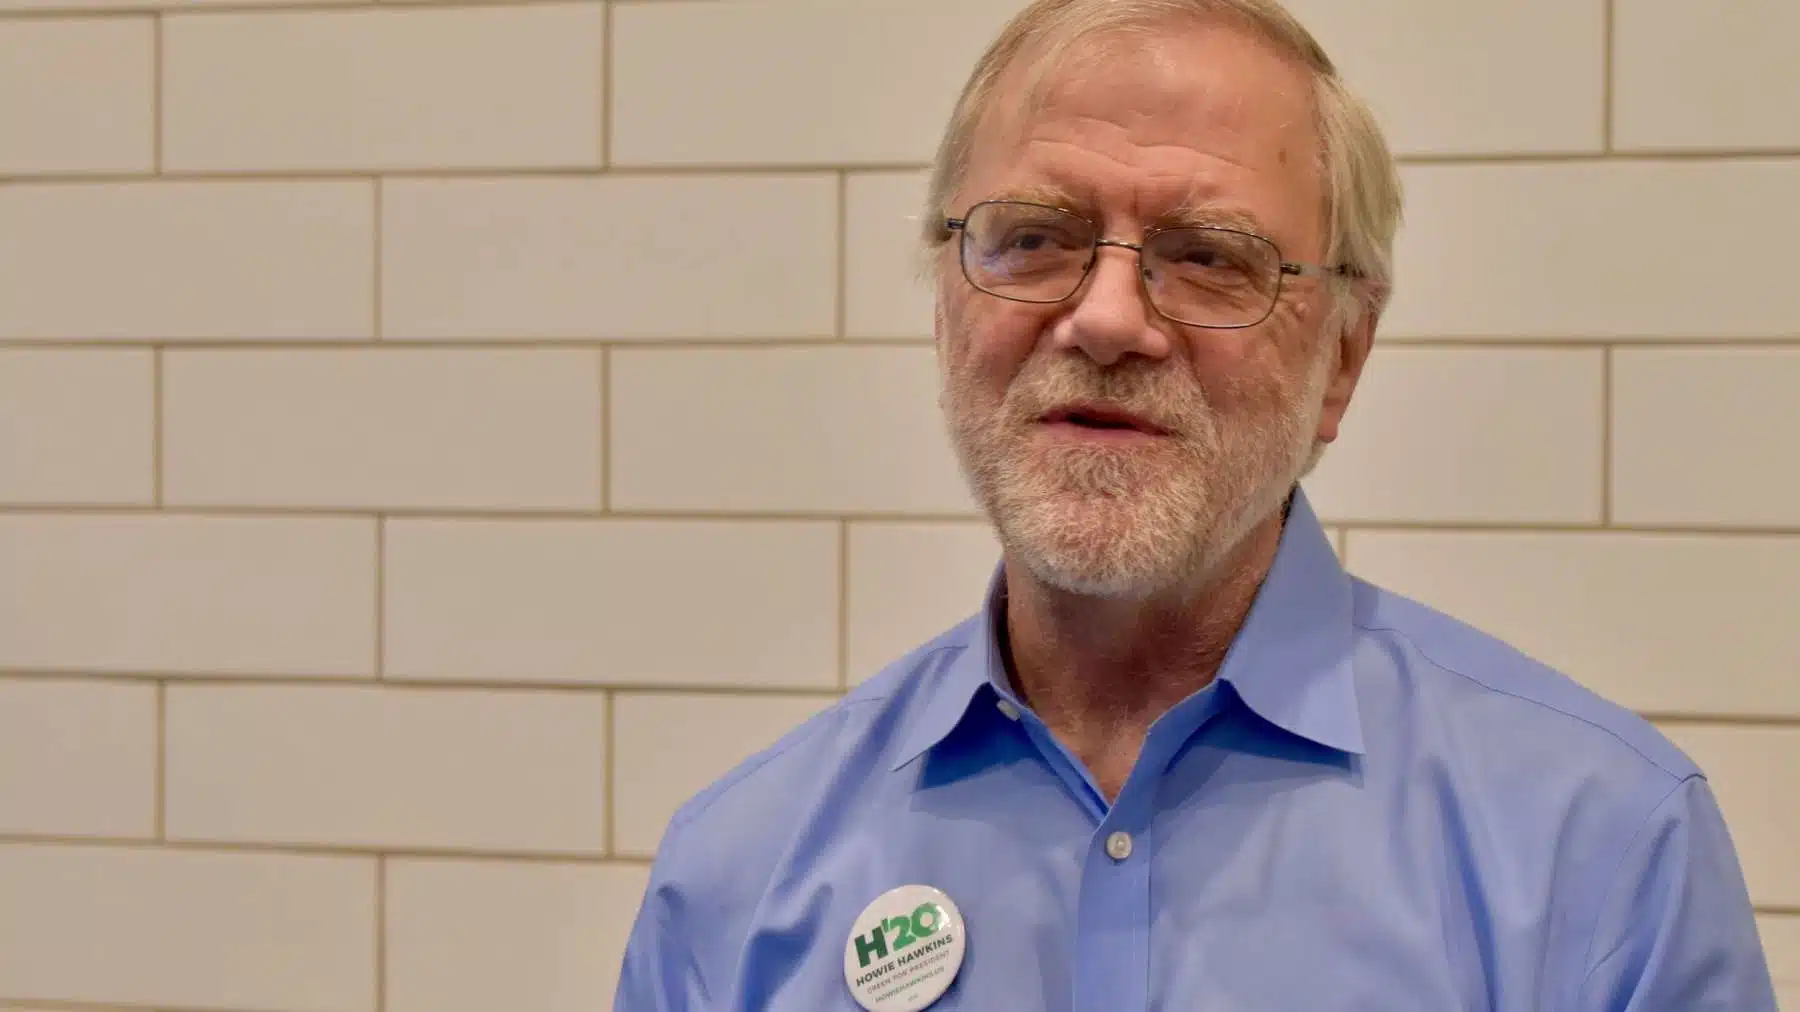 An interview with Green Party presidential hopeful Howie Hawkins